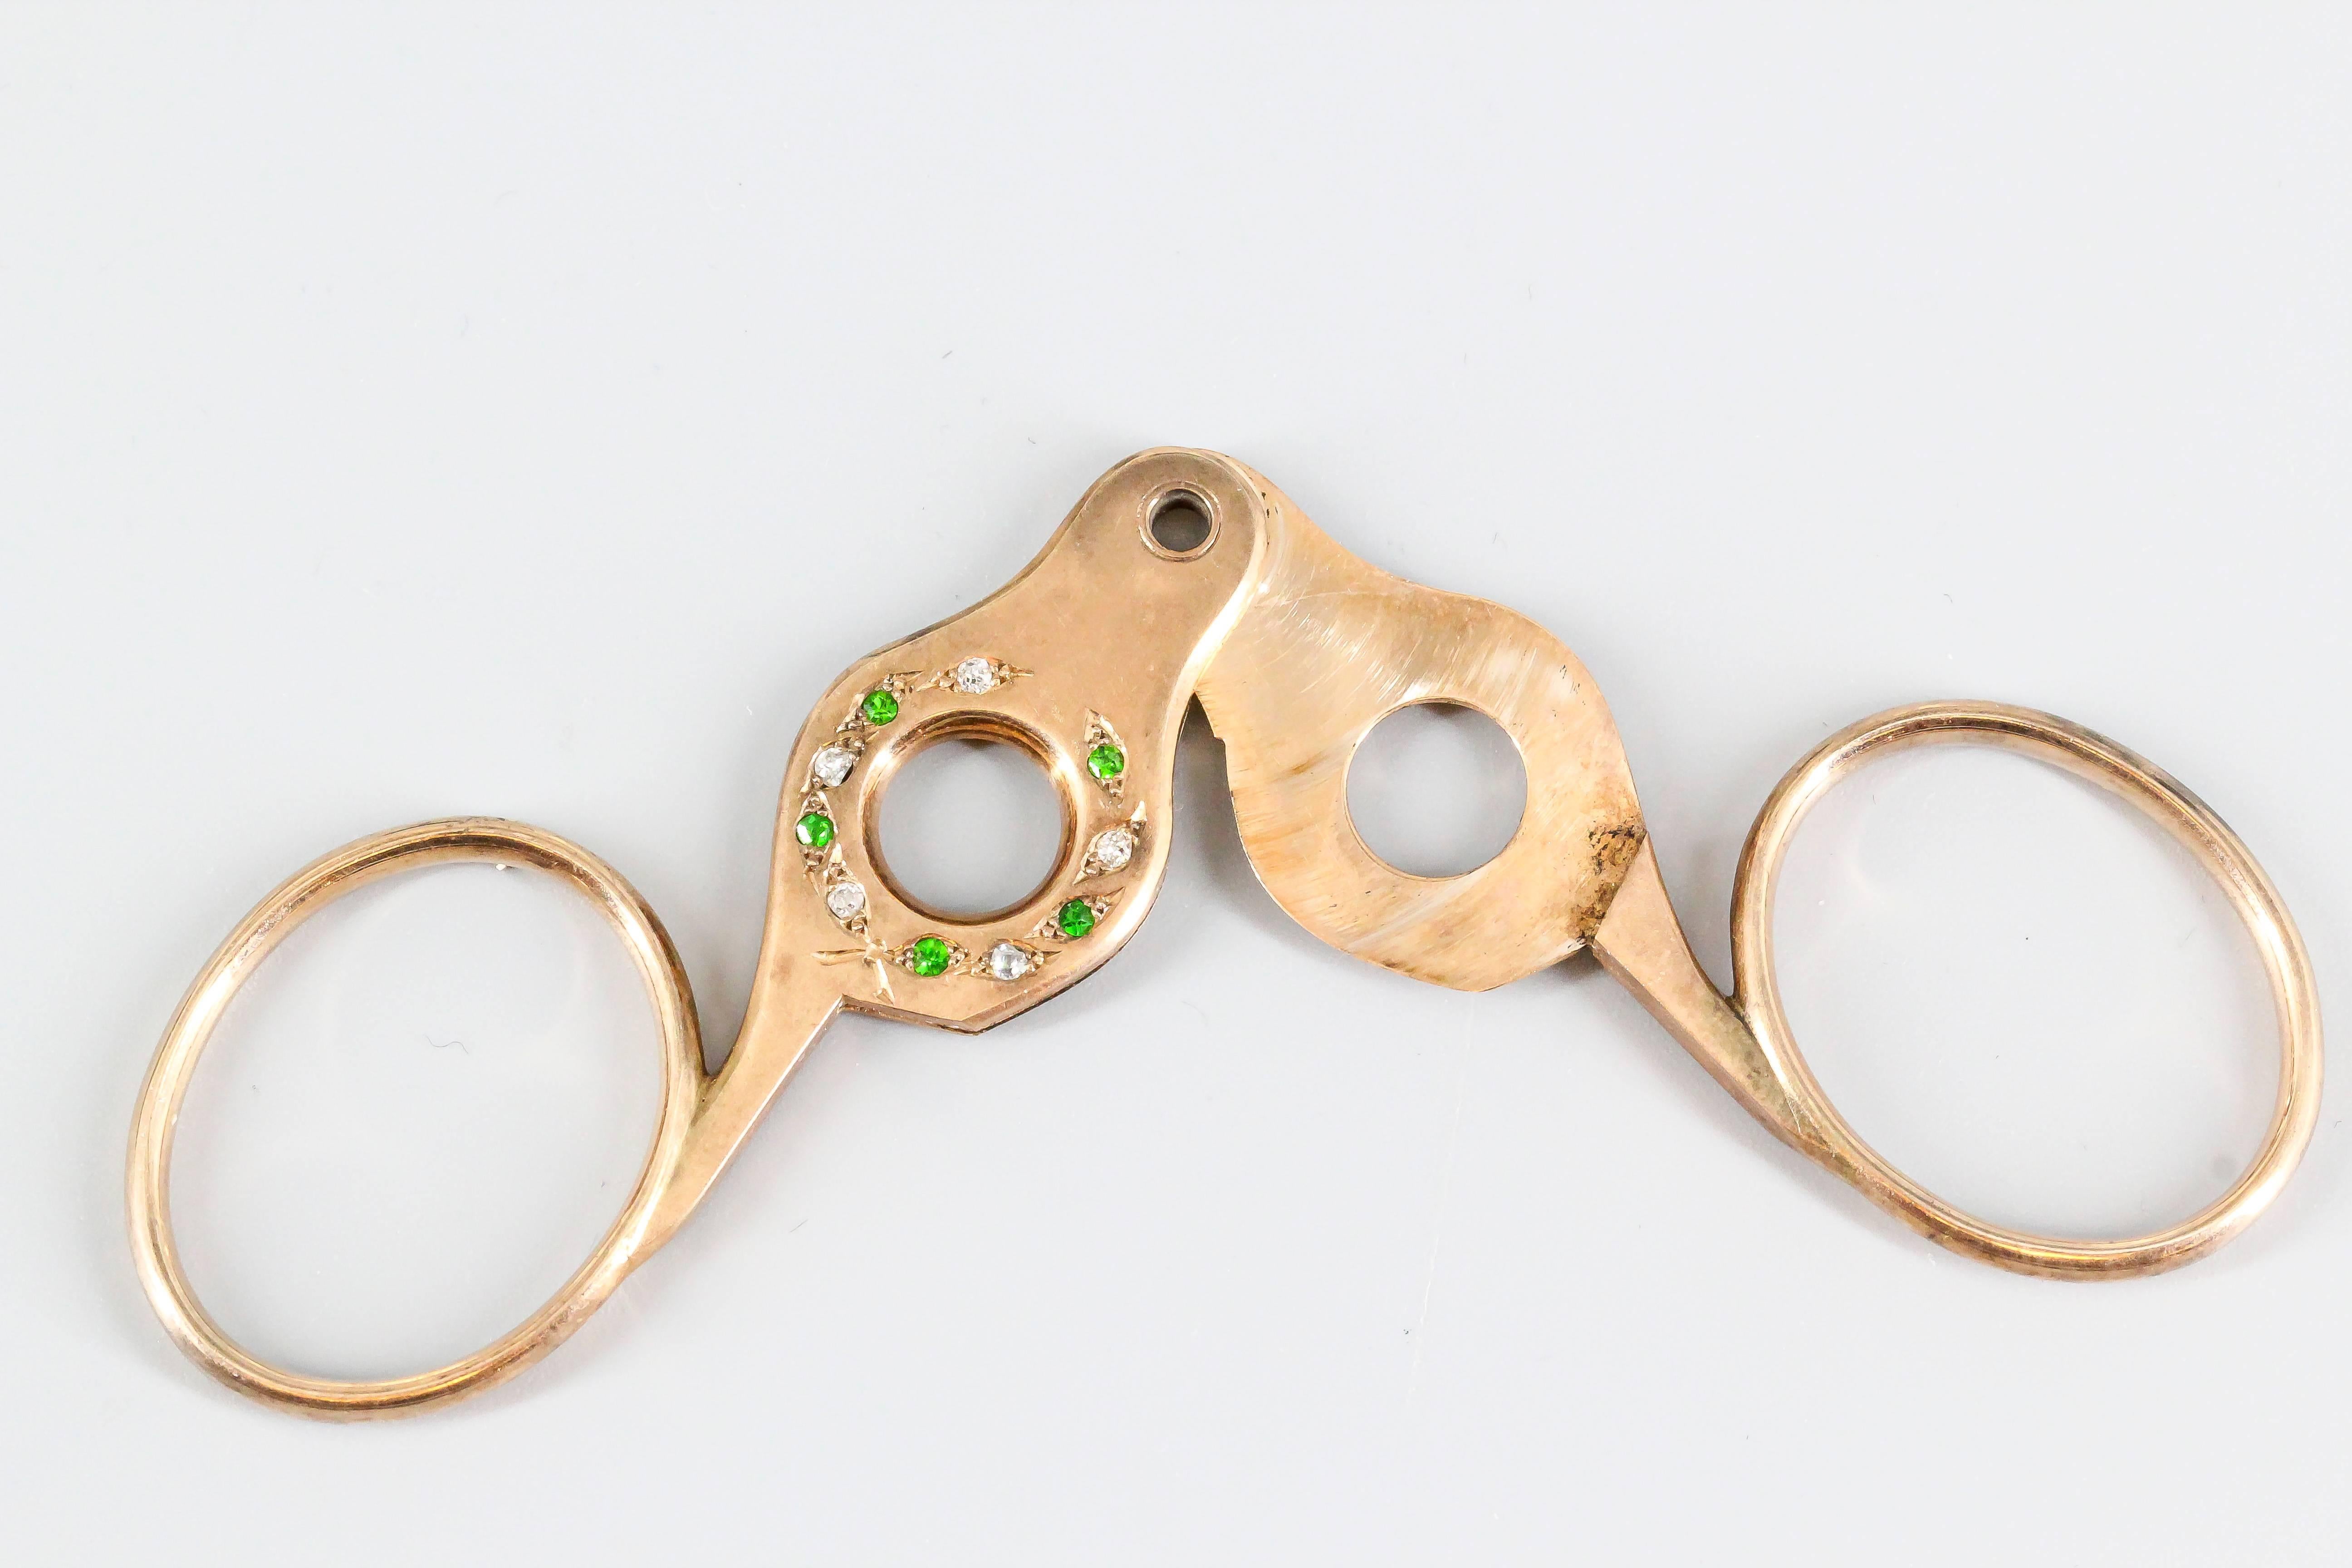 Chic diamond, emerald and rose gold cigar cutter, circa 1890s. It features high grade round cut diamonds and emeralds on one side. 
